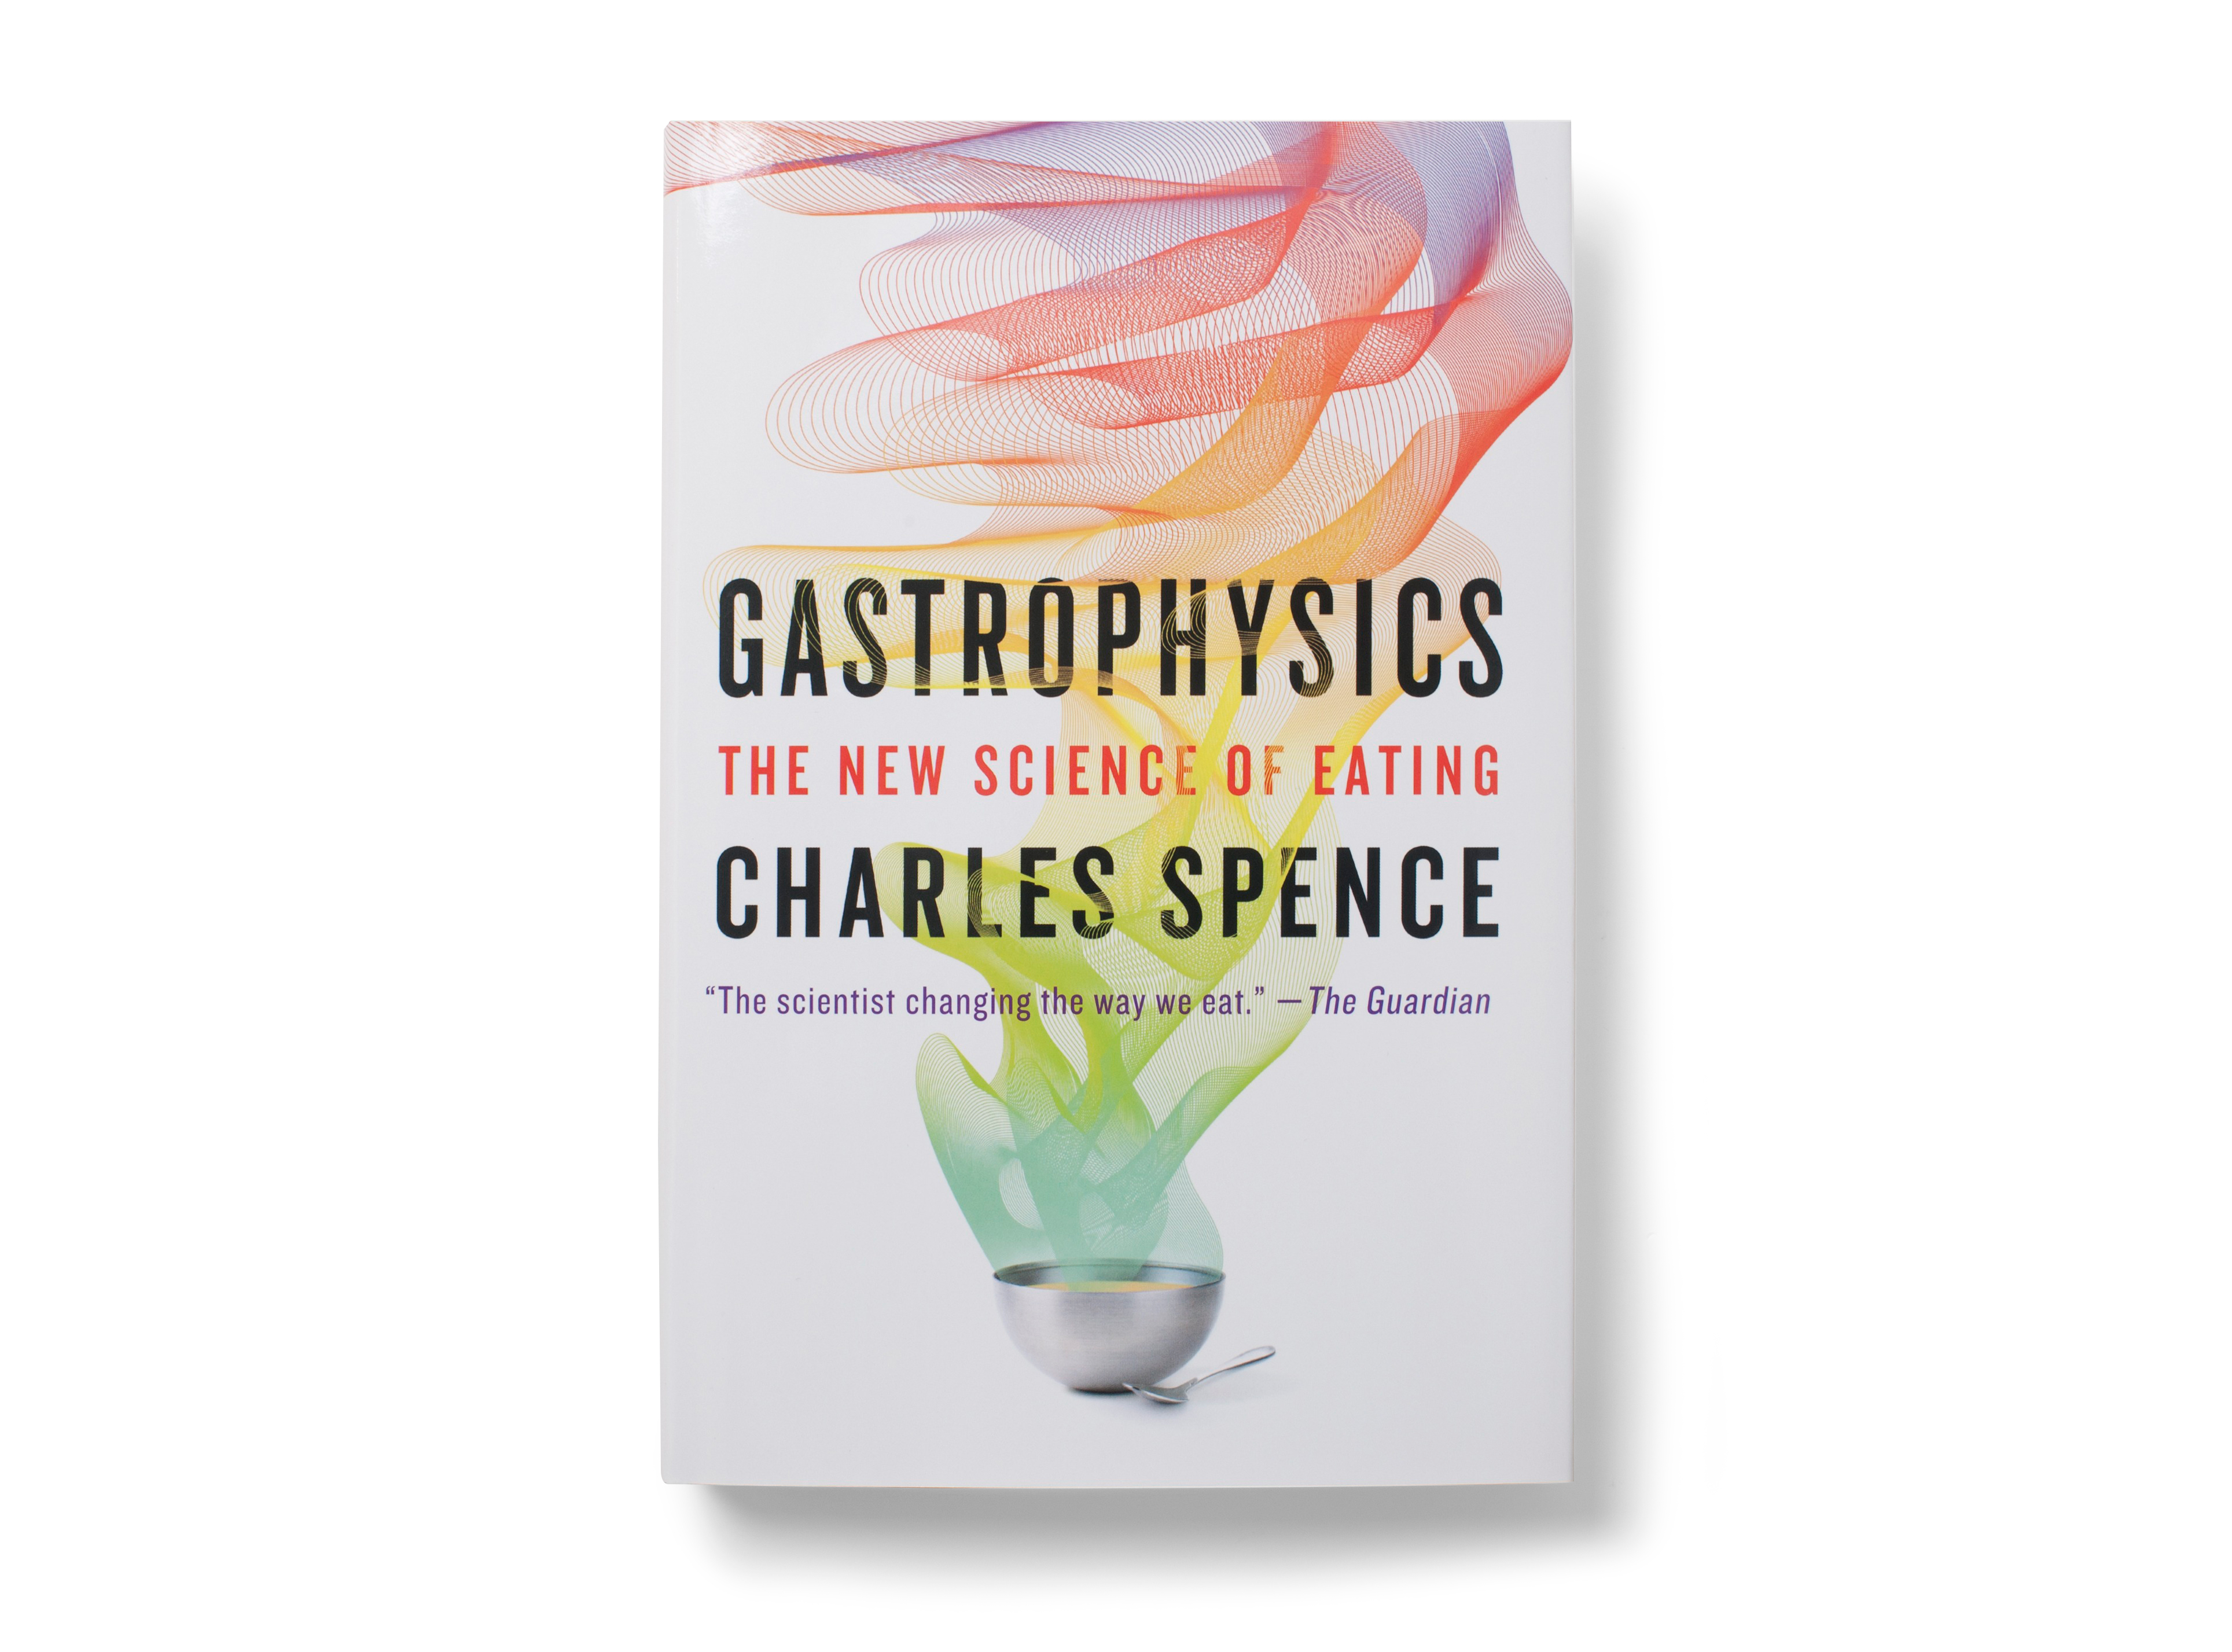 gastrophysics-the-new-science-of-eating